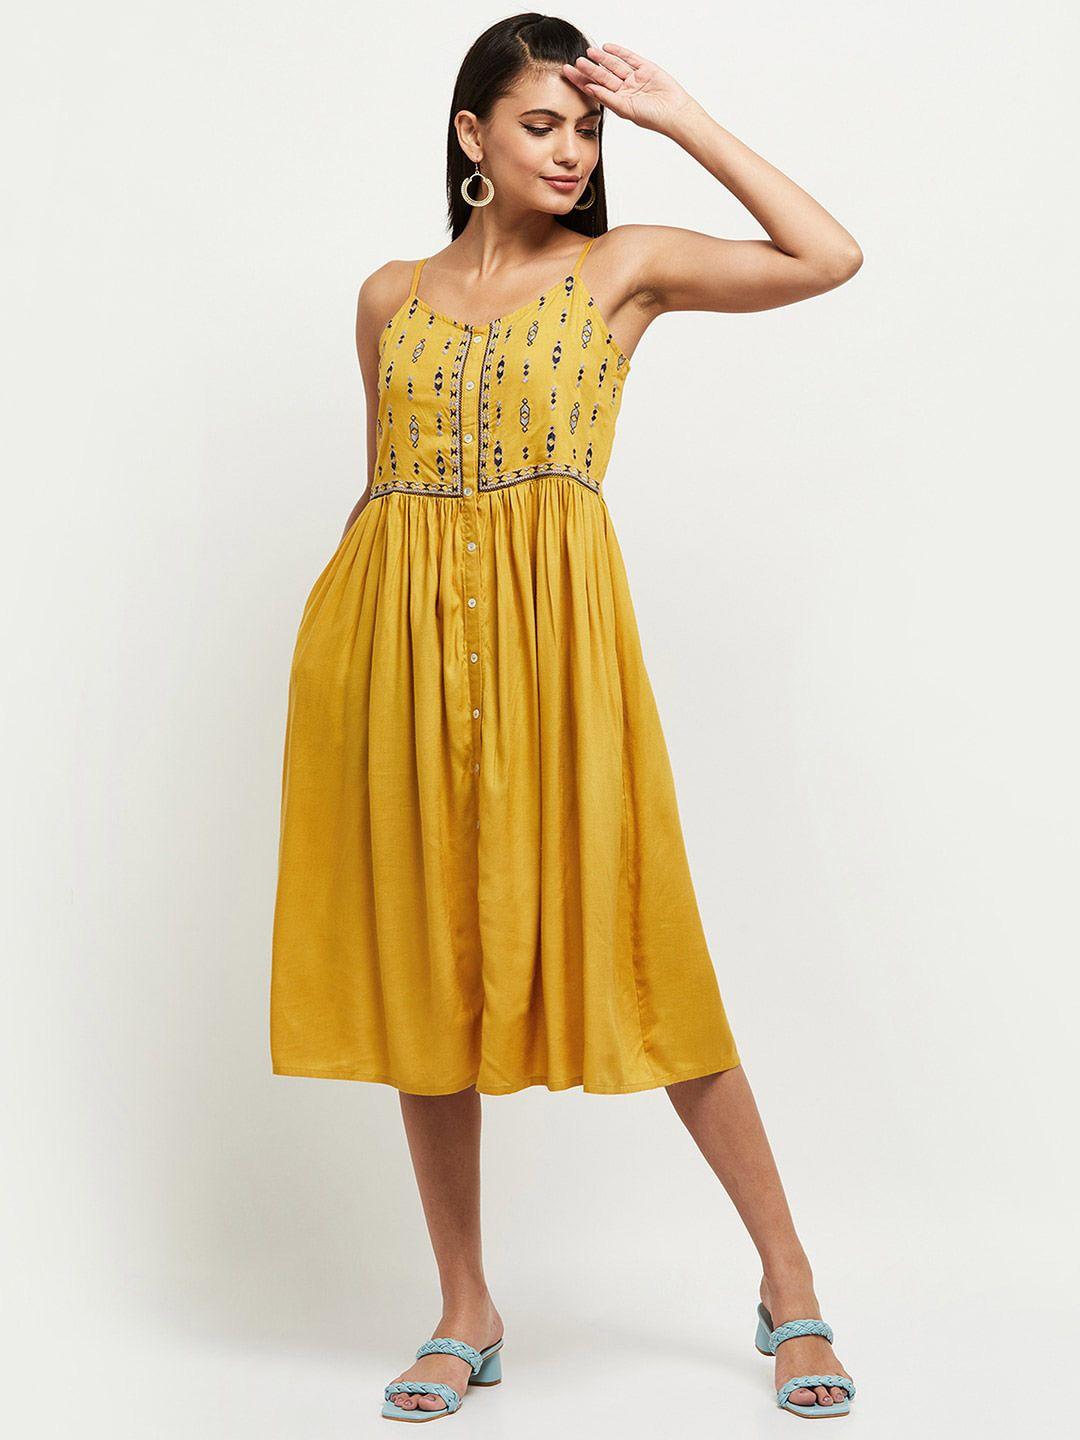 max mustard yellow floral embroidered midi dress